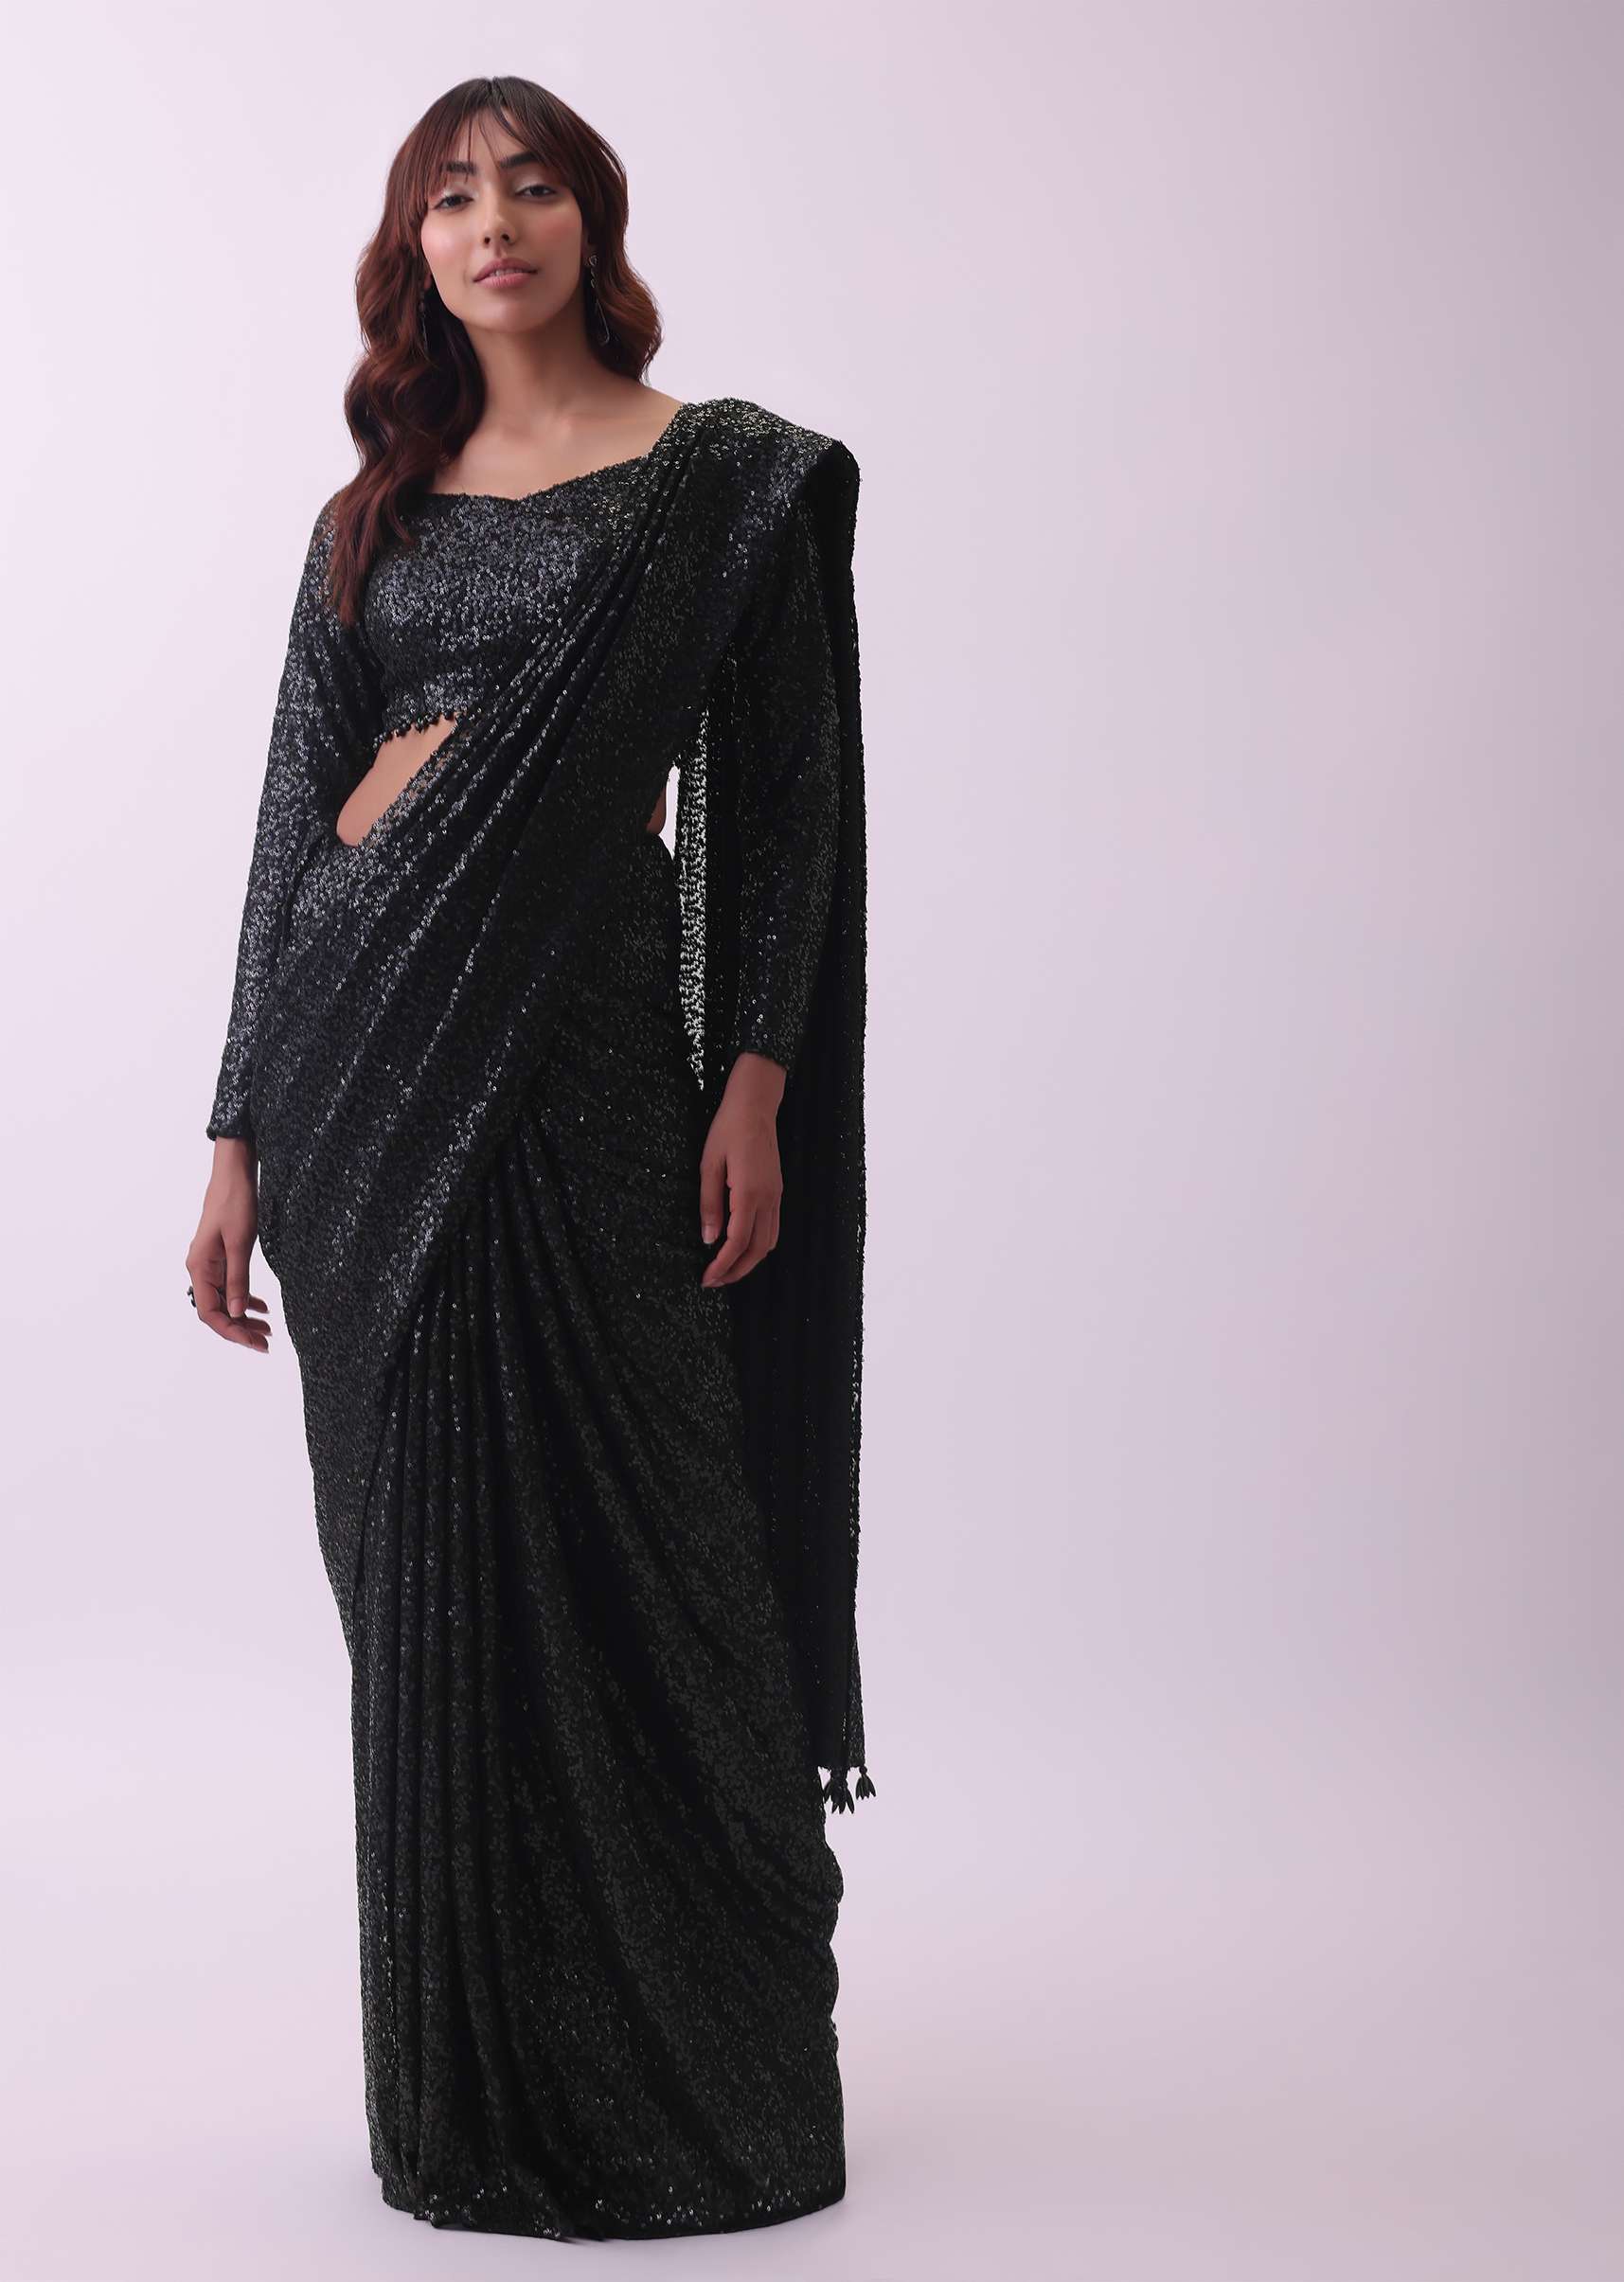 Black Sequins Saree And Blouse With Crystal Detailing